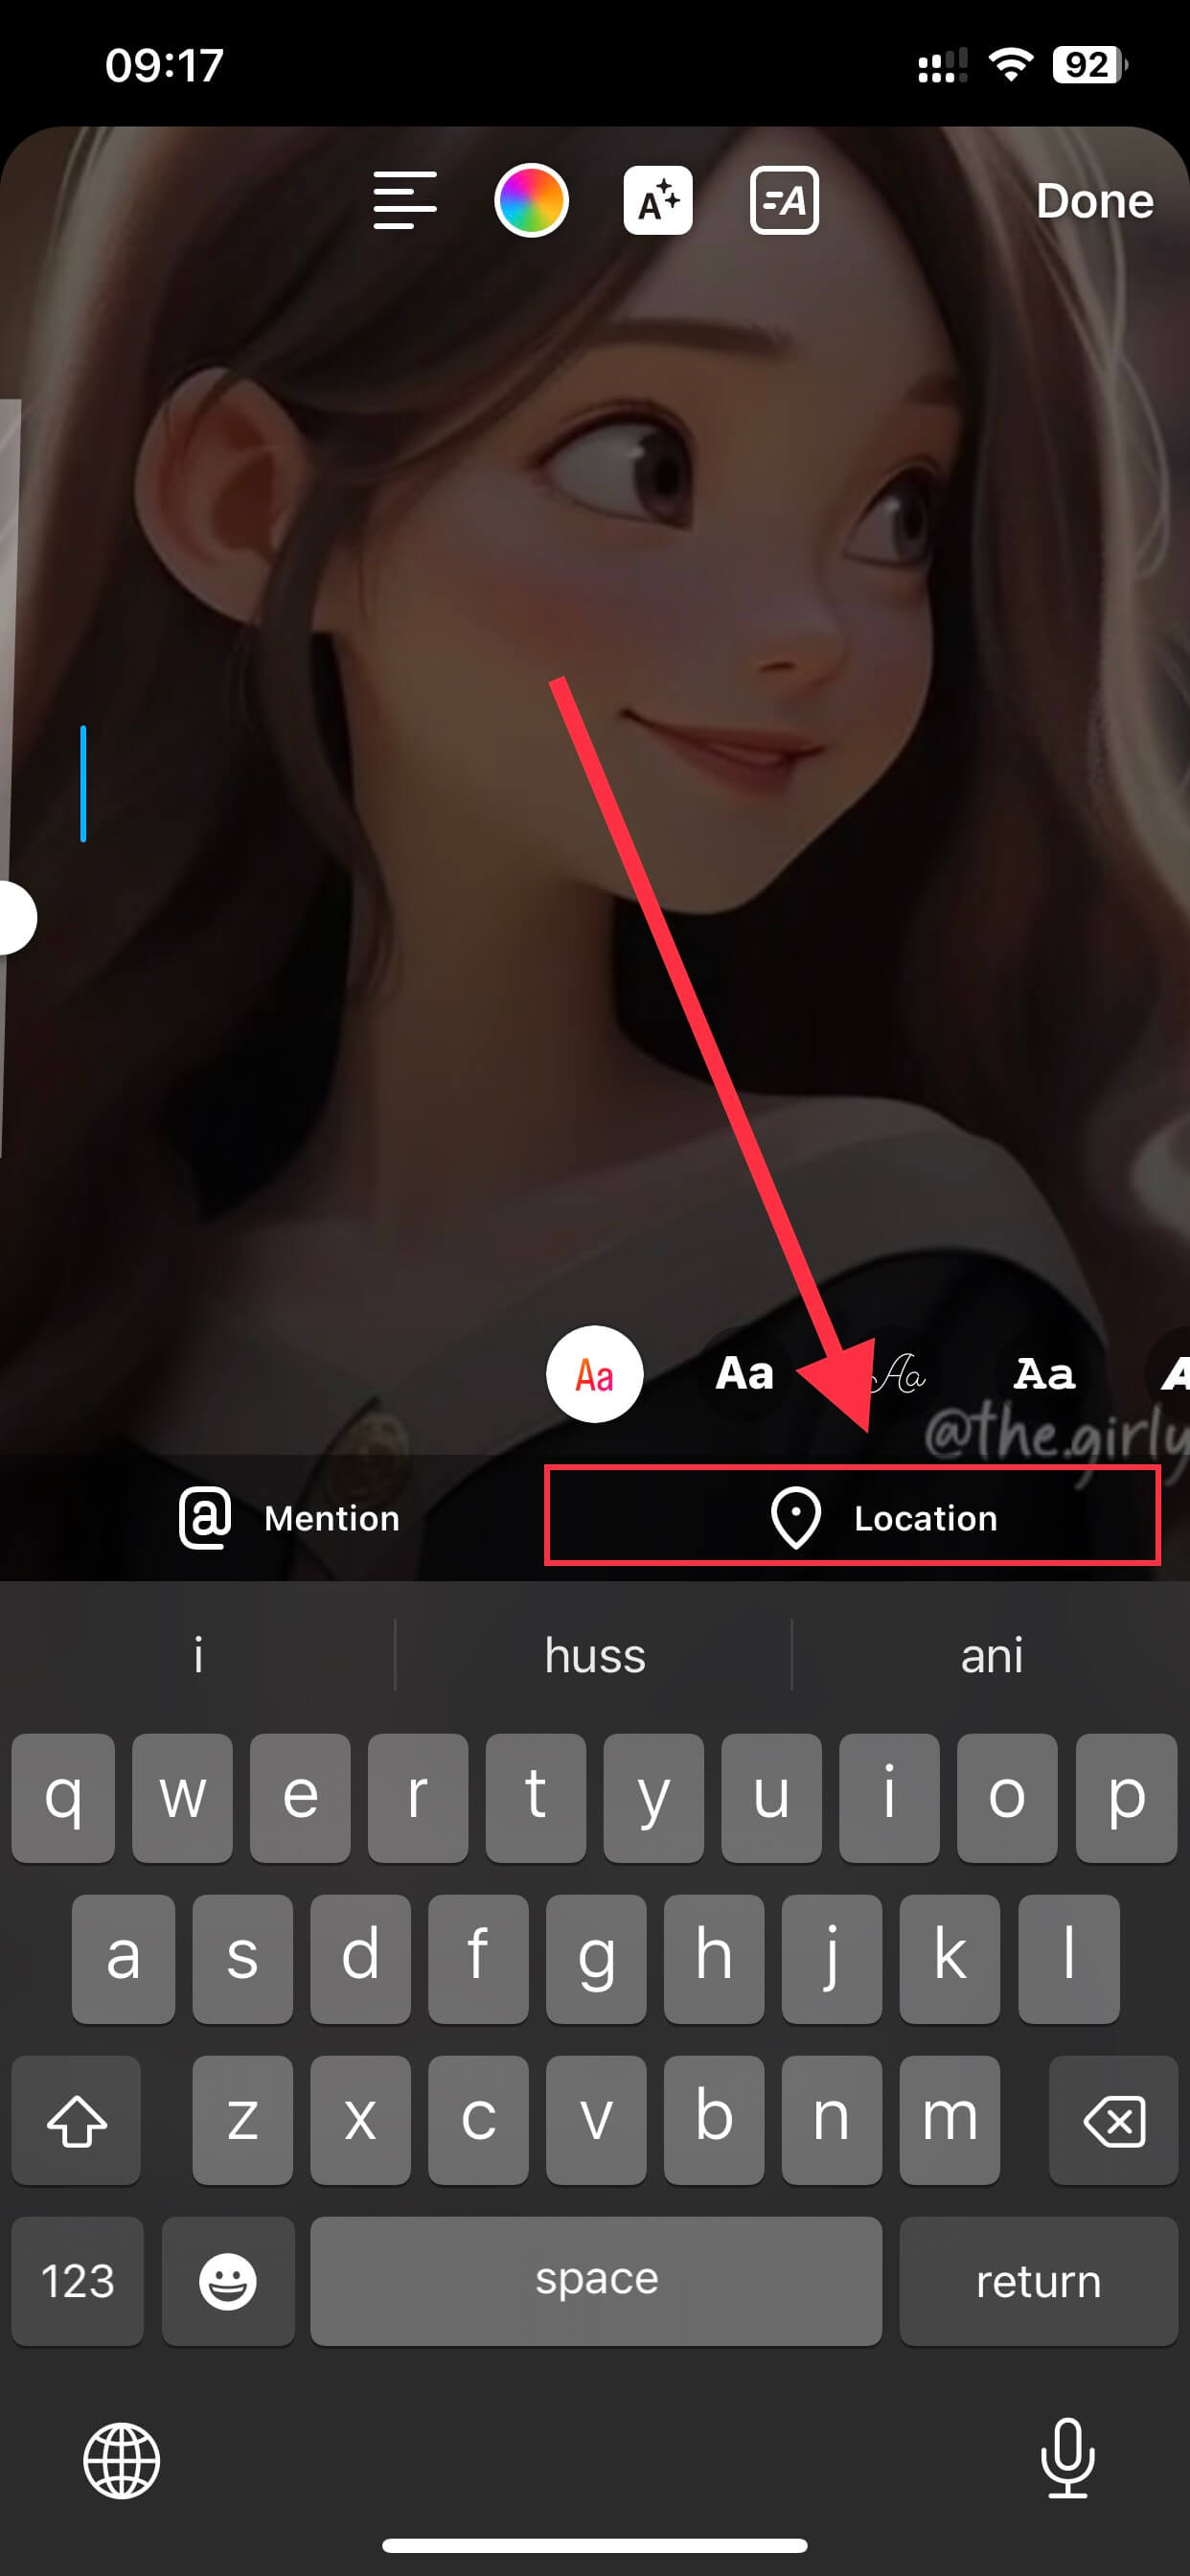 tap on location to add location on instagram story